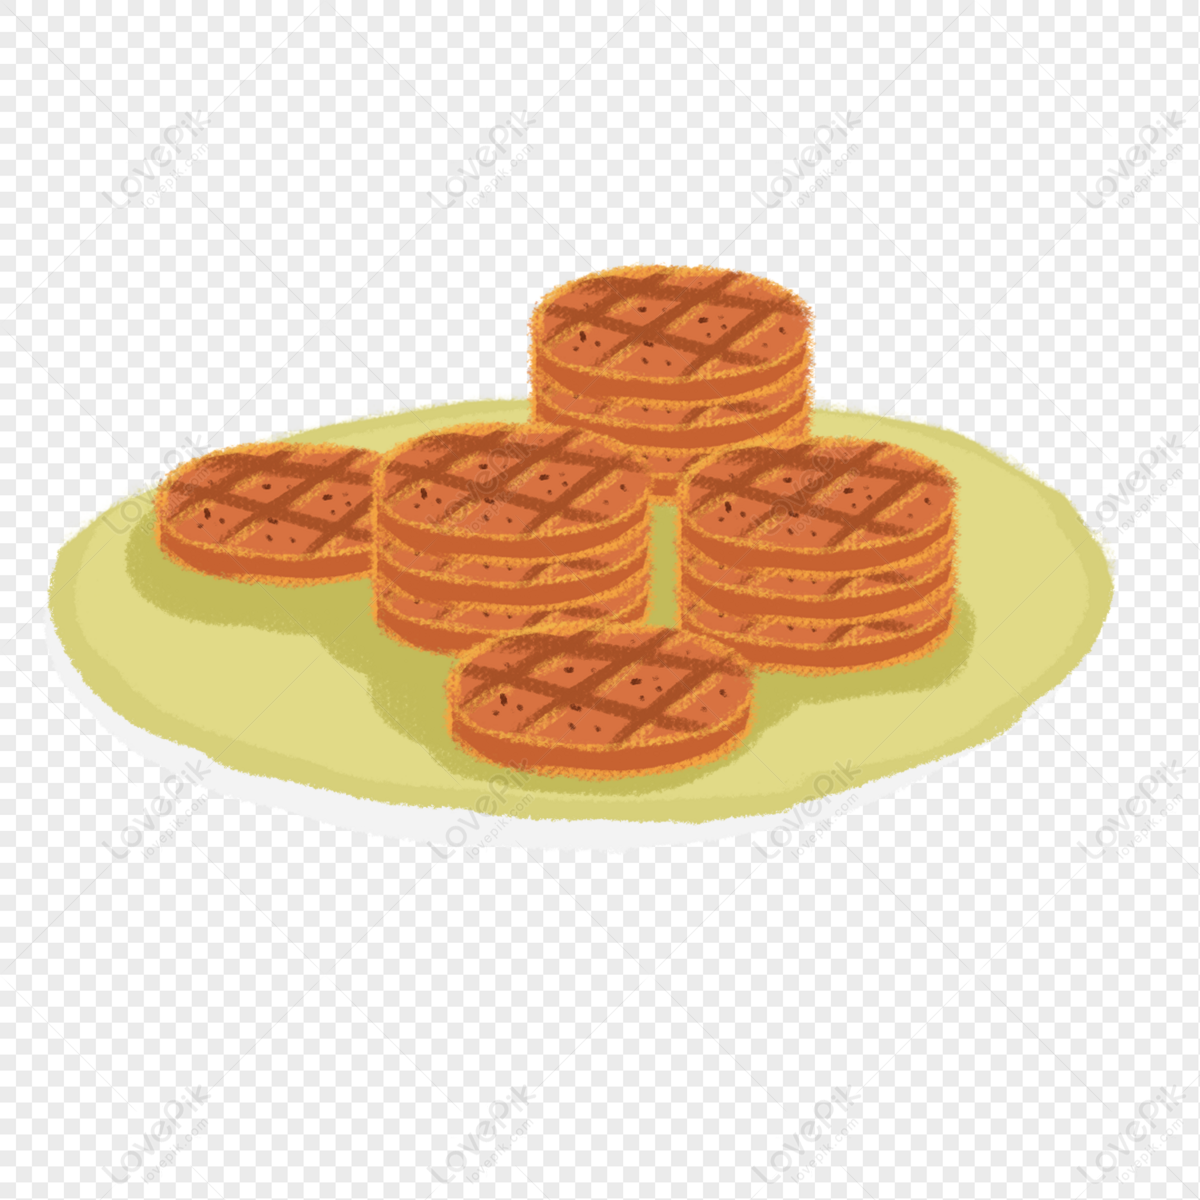 Biscuits PNG White Transparent And Clipart Image For Free Download ...